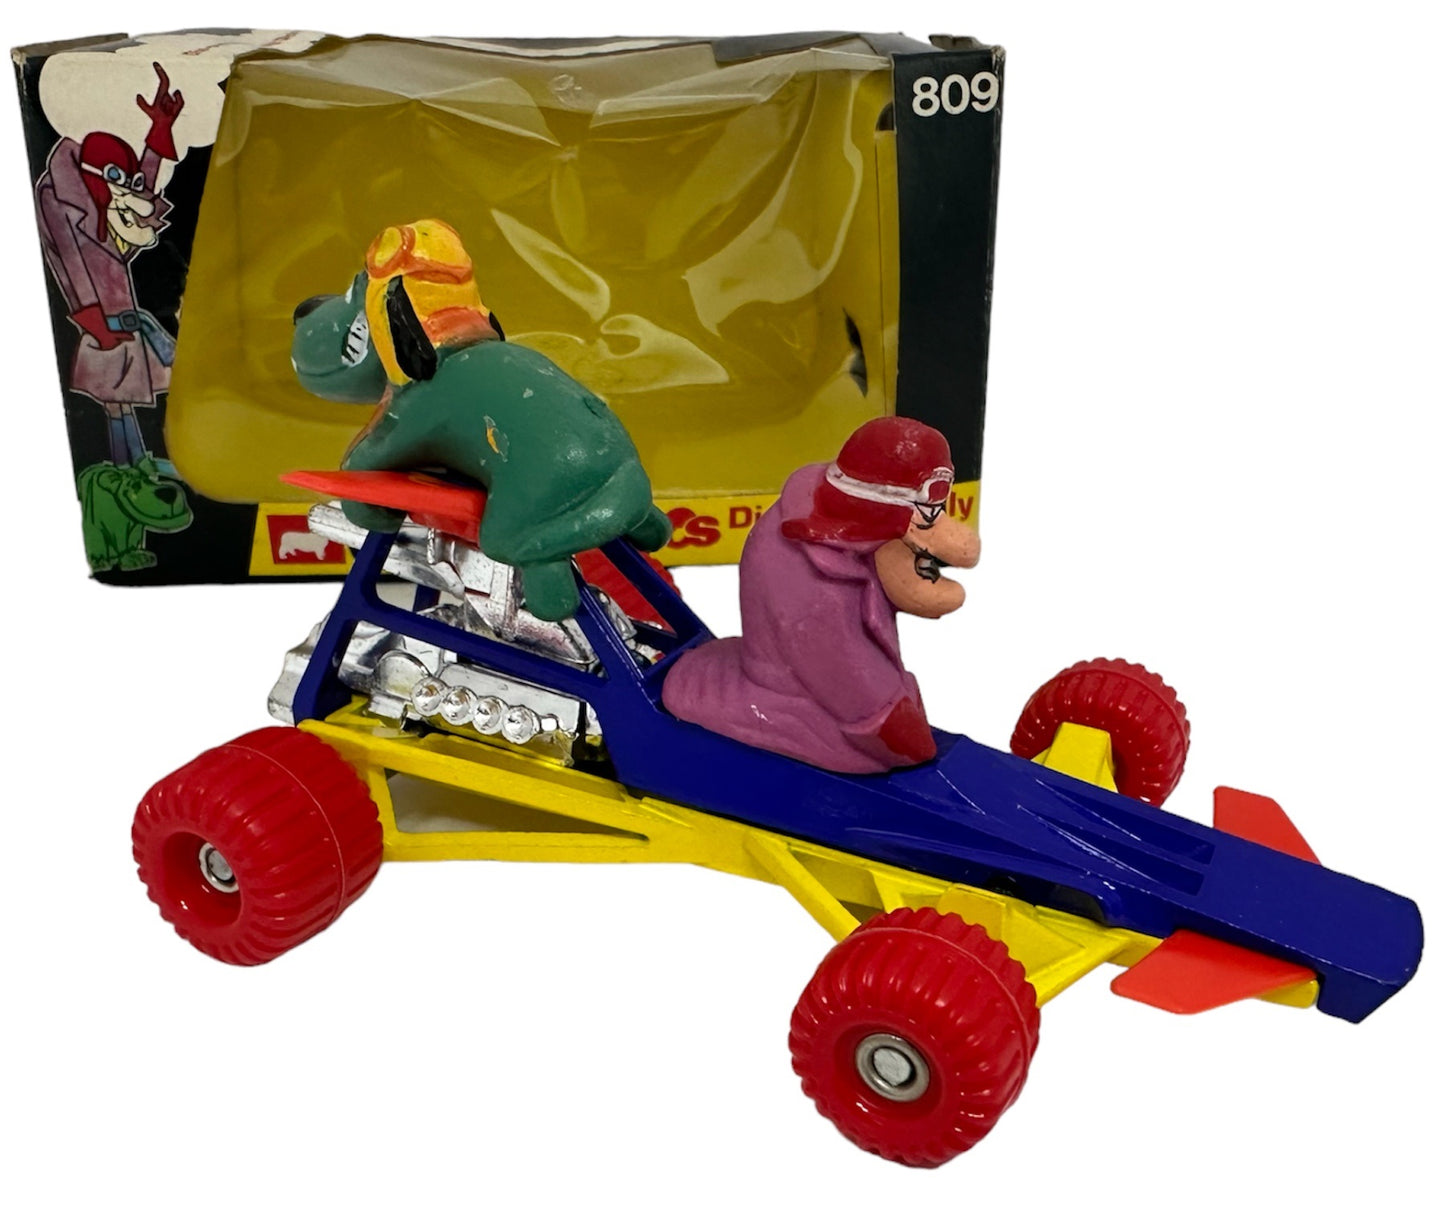 Vintage Corgis Comics 1973 Dick Dastardly Racing Car Diecast Model No. 809 With Muttley - Wacky Racers - Mint Condition In The Original Box - Shop Stock Room Find